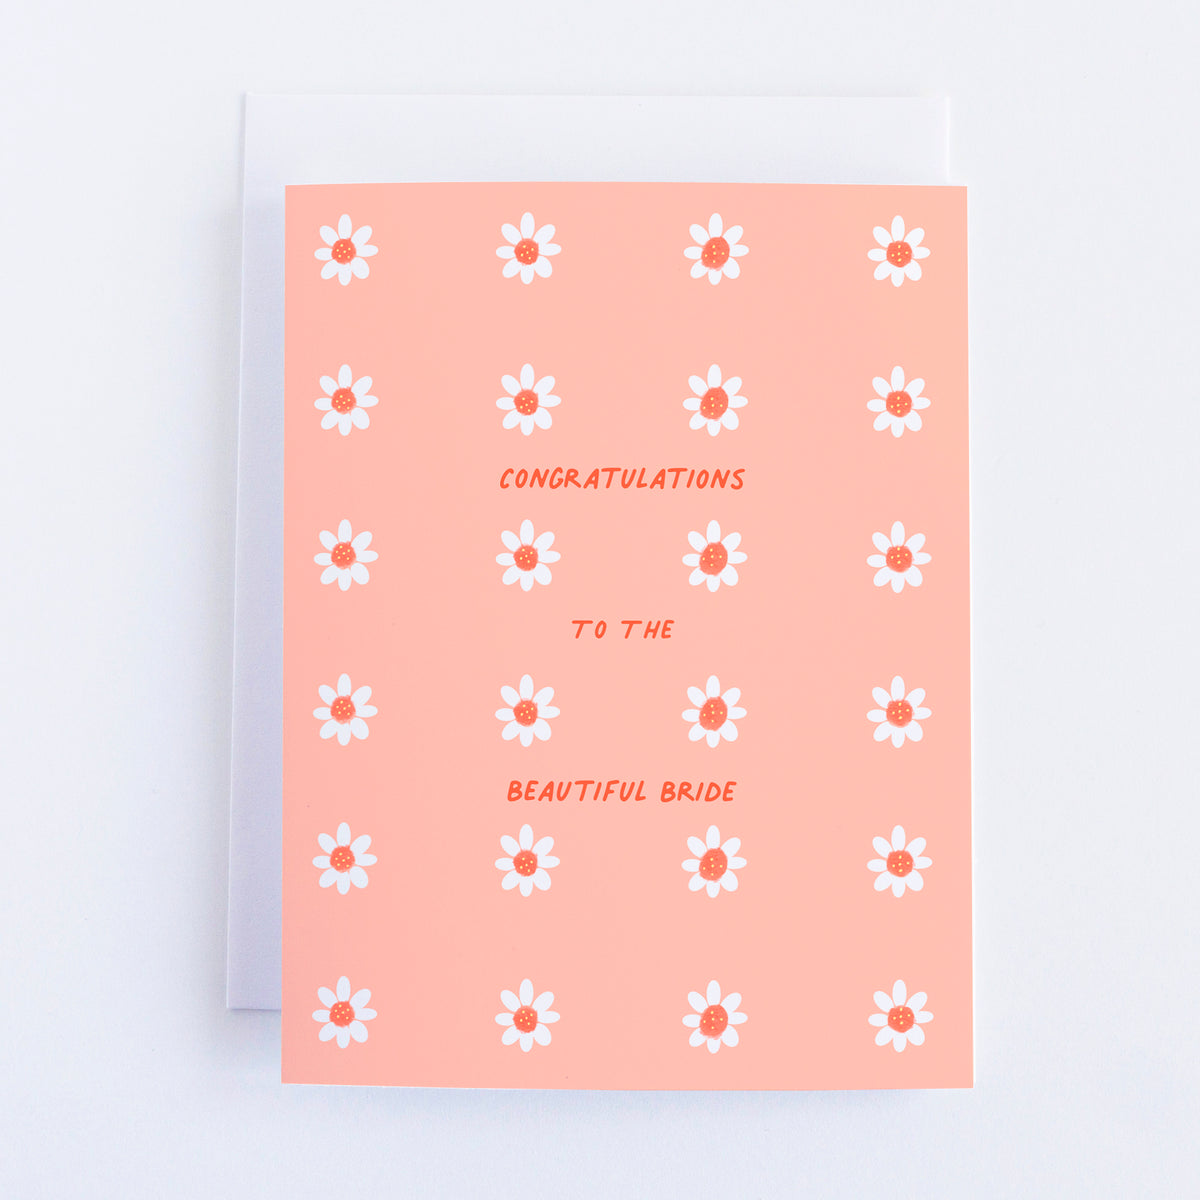 A pink greeting card with little white flowers with dark pink centers in 6 rows of 4 flowers. The text reads "Congratulations to the Beautiful Bride".